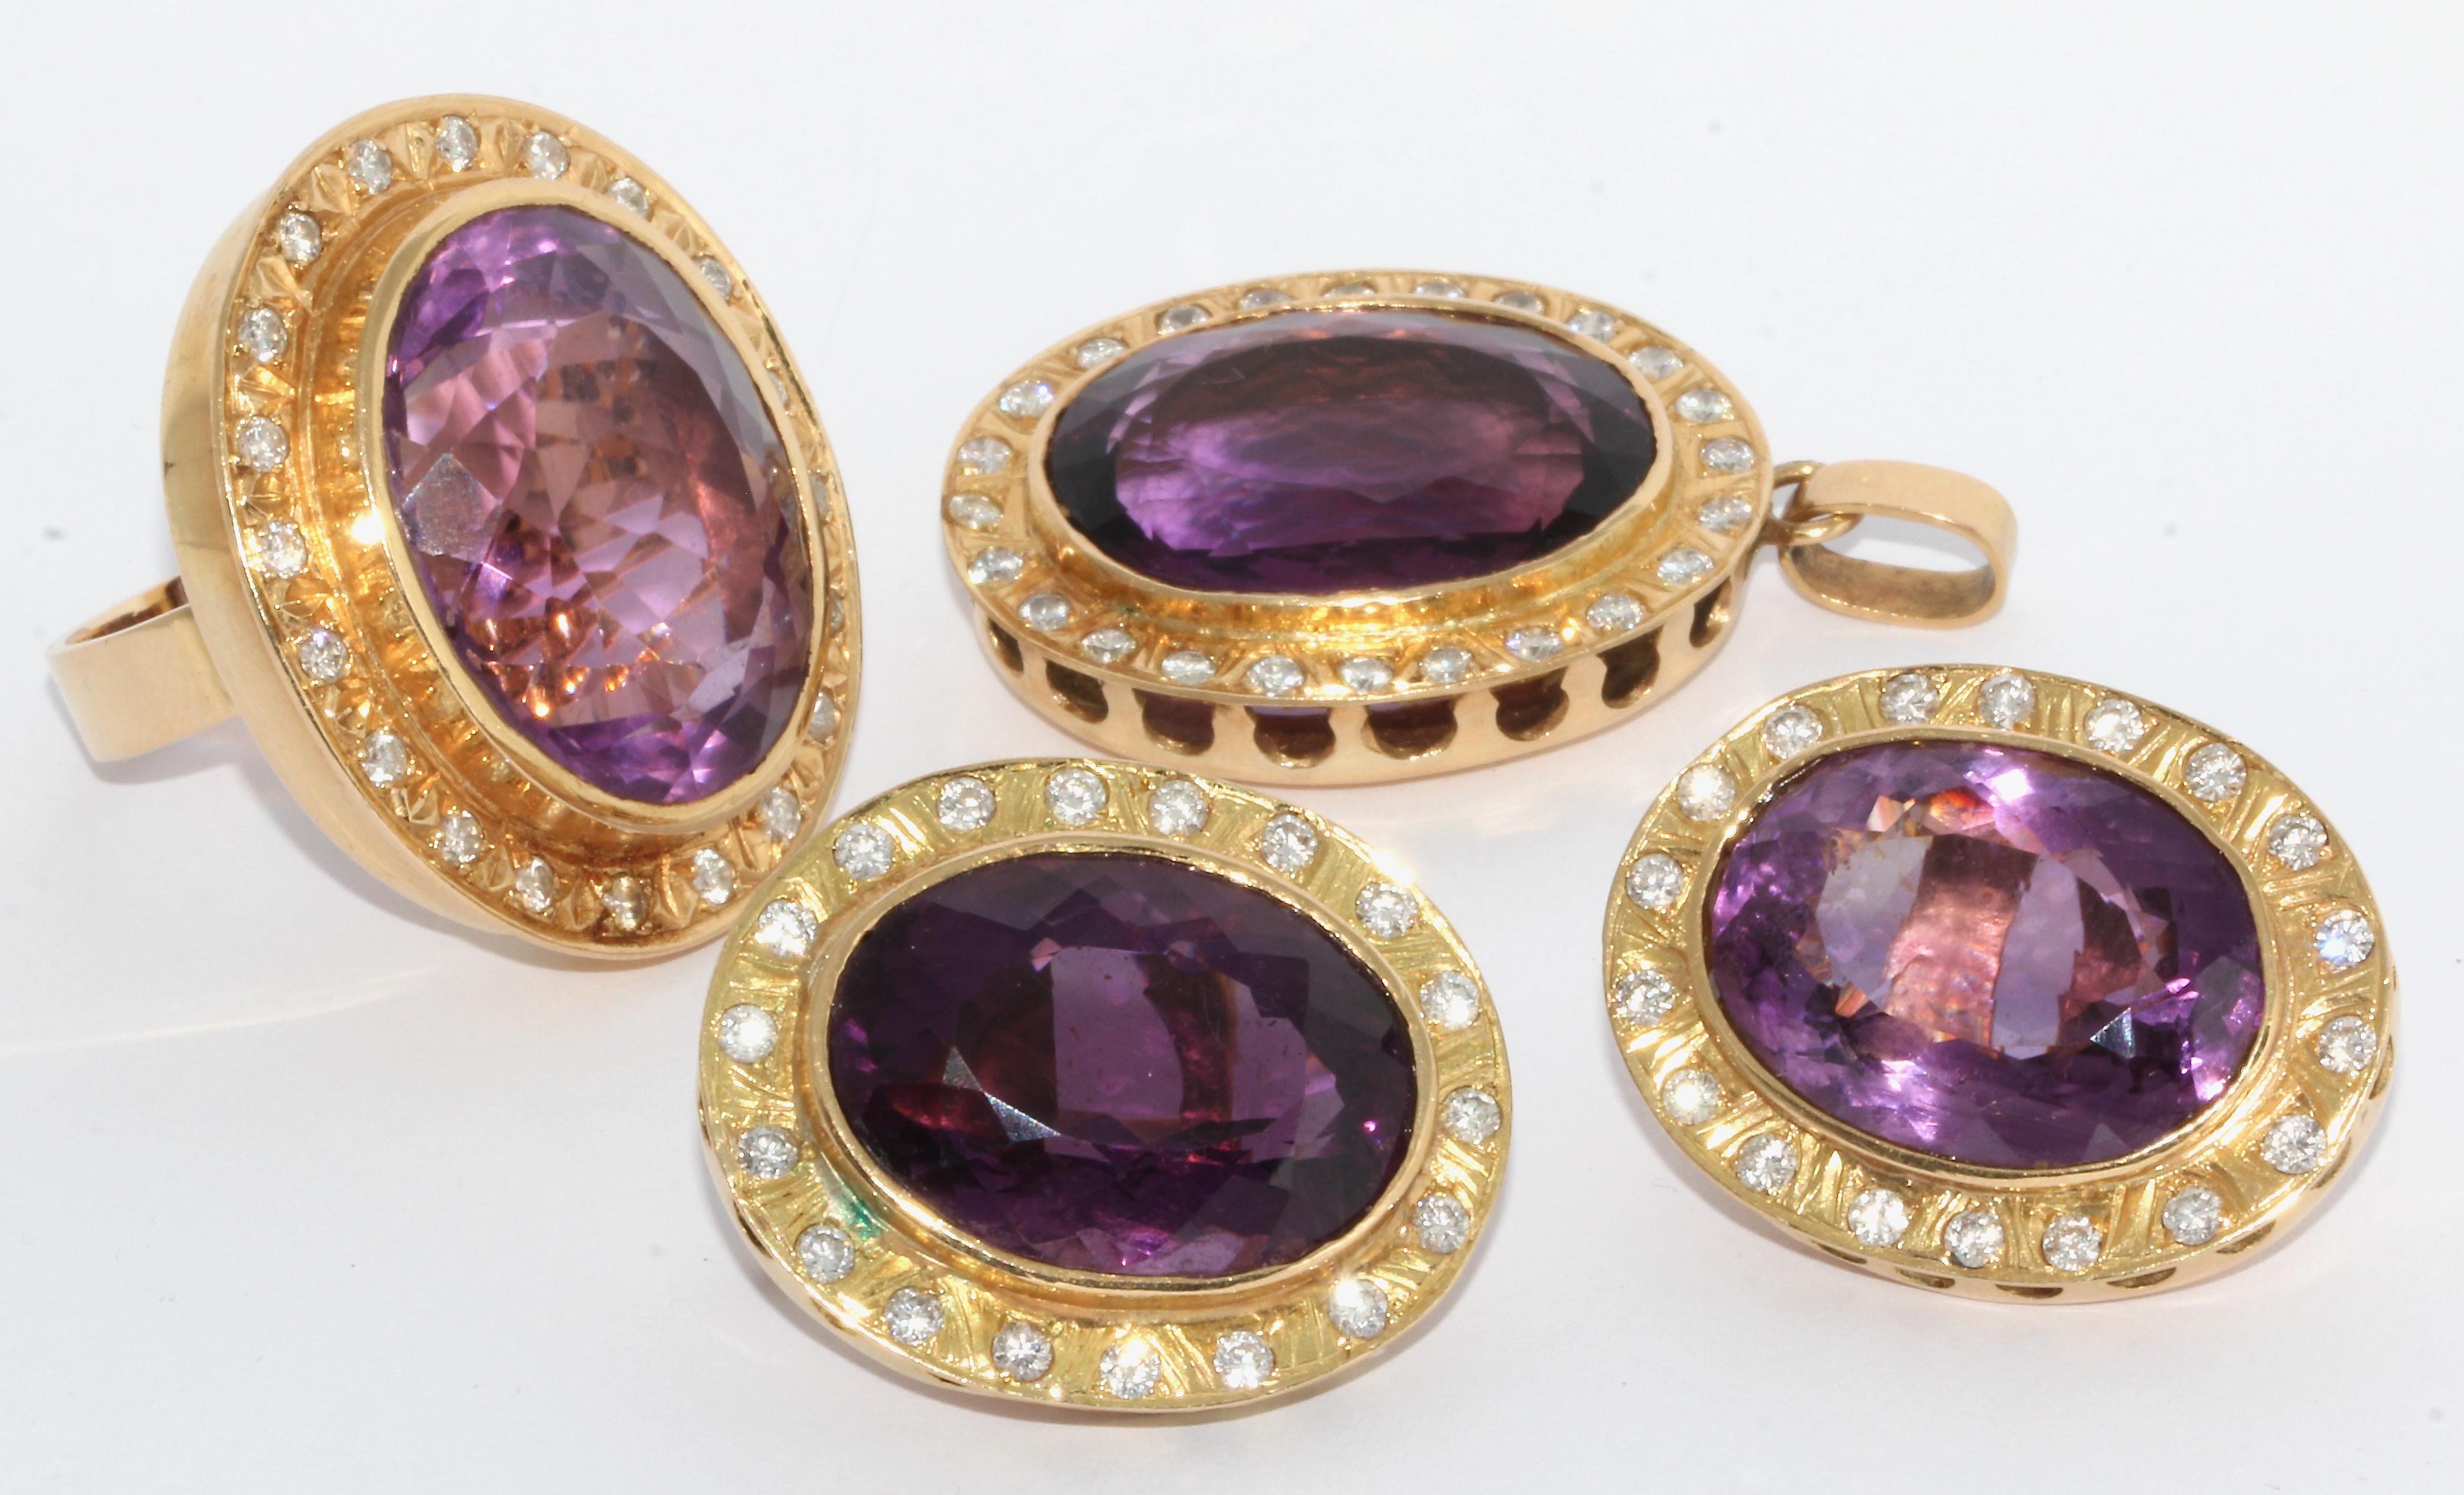 Beautiful amethyst set, consisting of a pendant, ear clips and ring. Set with diamonds. 18 Karat gold.

Dimensions earrings (each): 30.5 mm x 24 mm. The second ear clip is slightly larger than the other.

Dimensions pendant: (without eyelet): 33.5